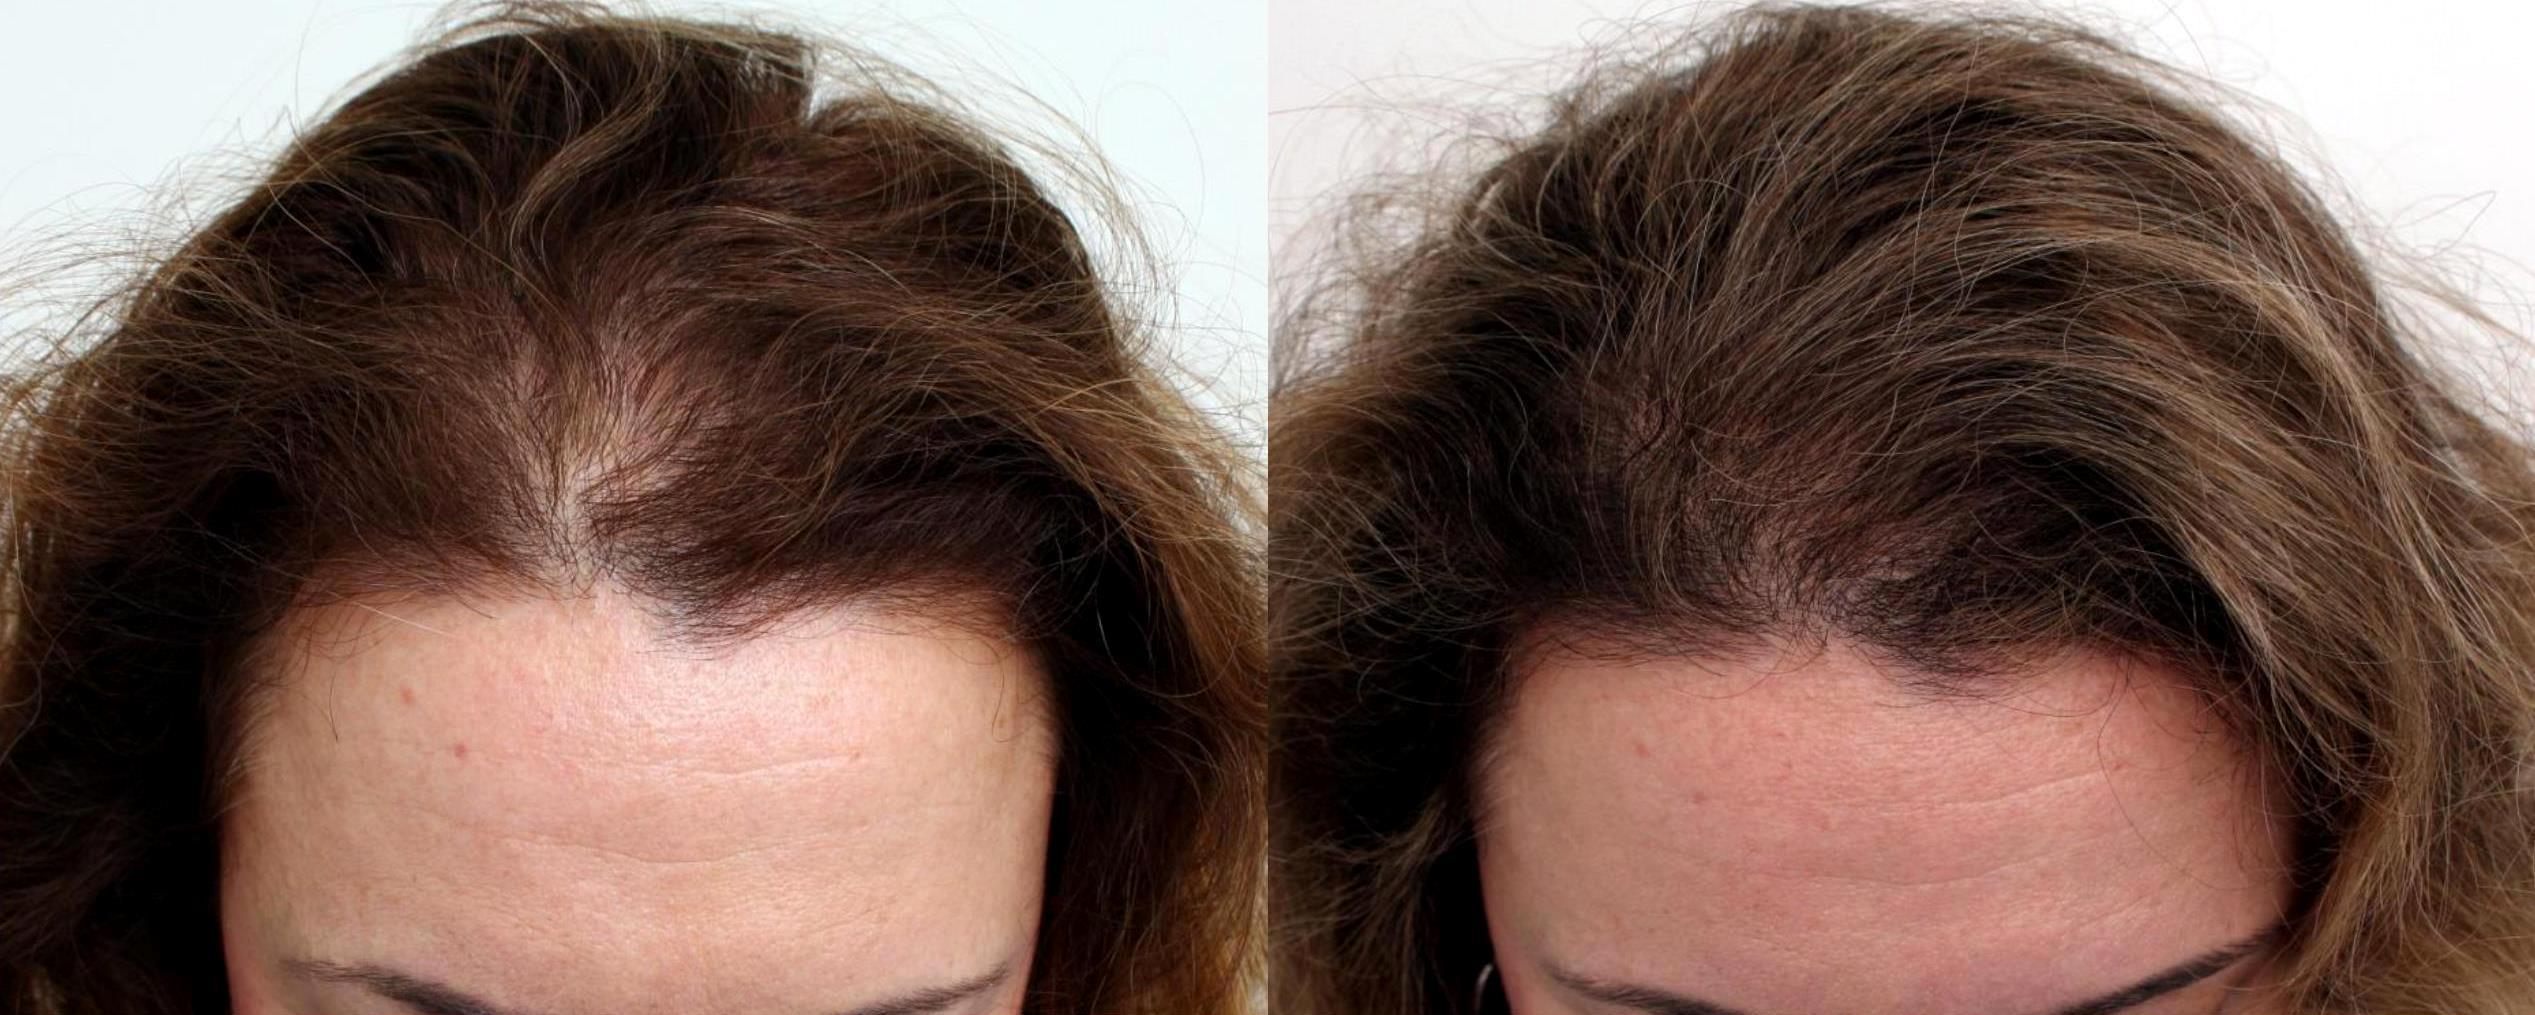 All about - Hair loss in women